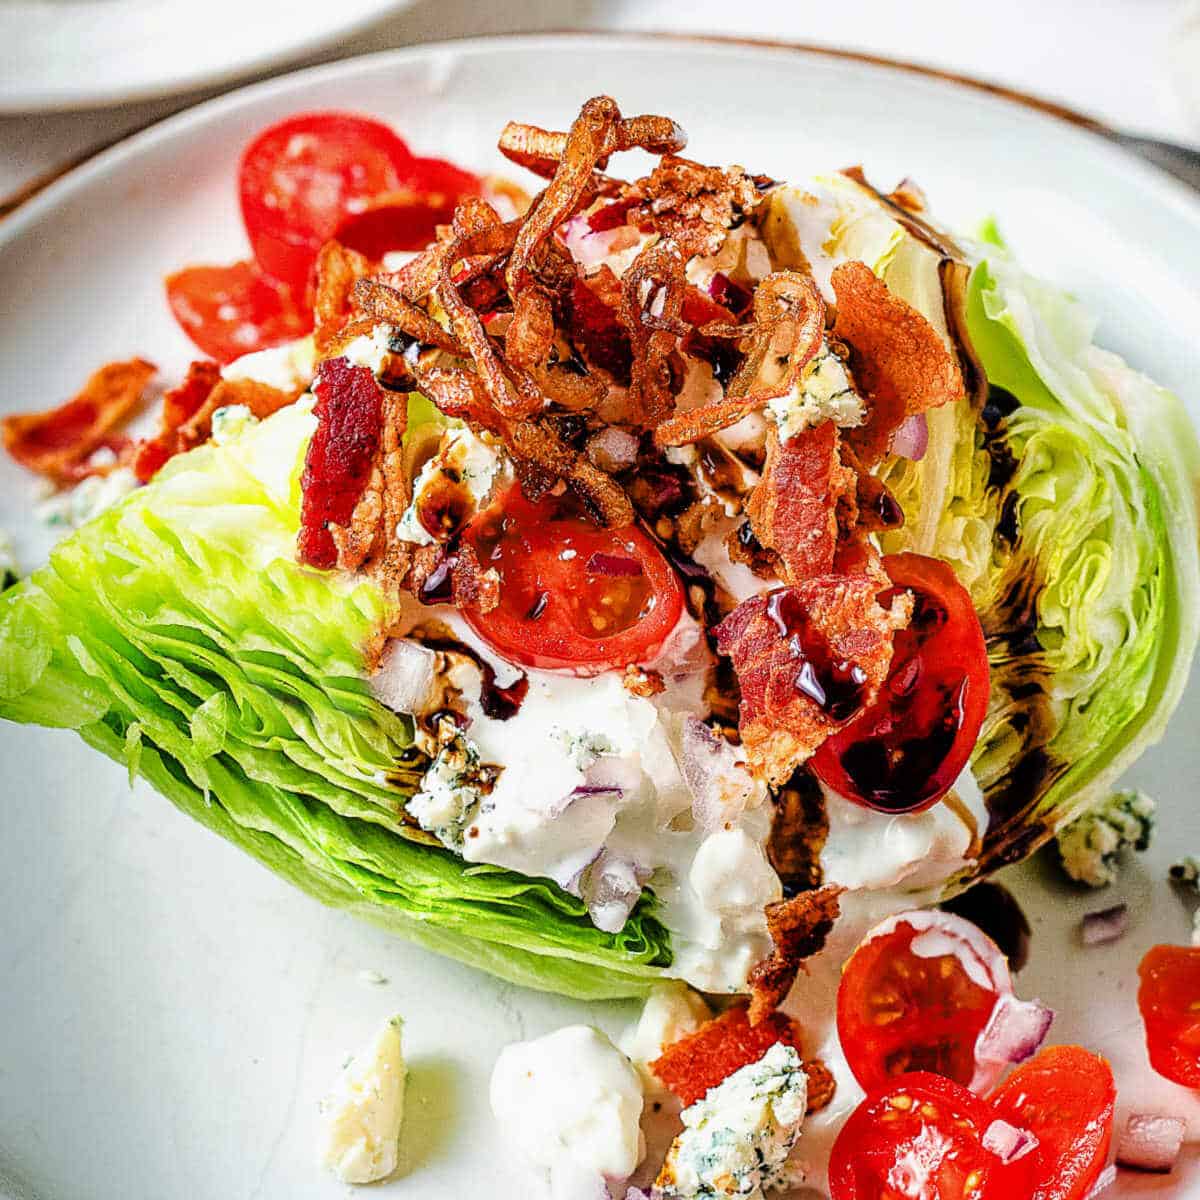 A loaded wedge salad on a plate topped with crispy fried shallots.